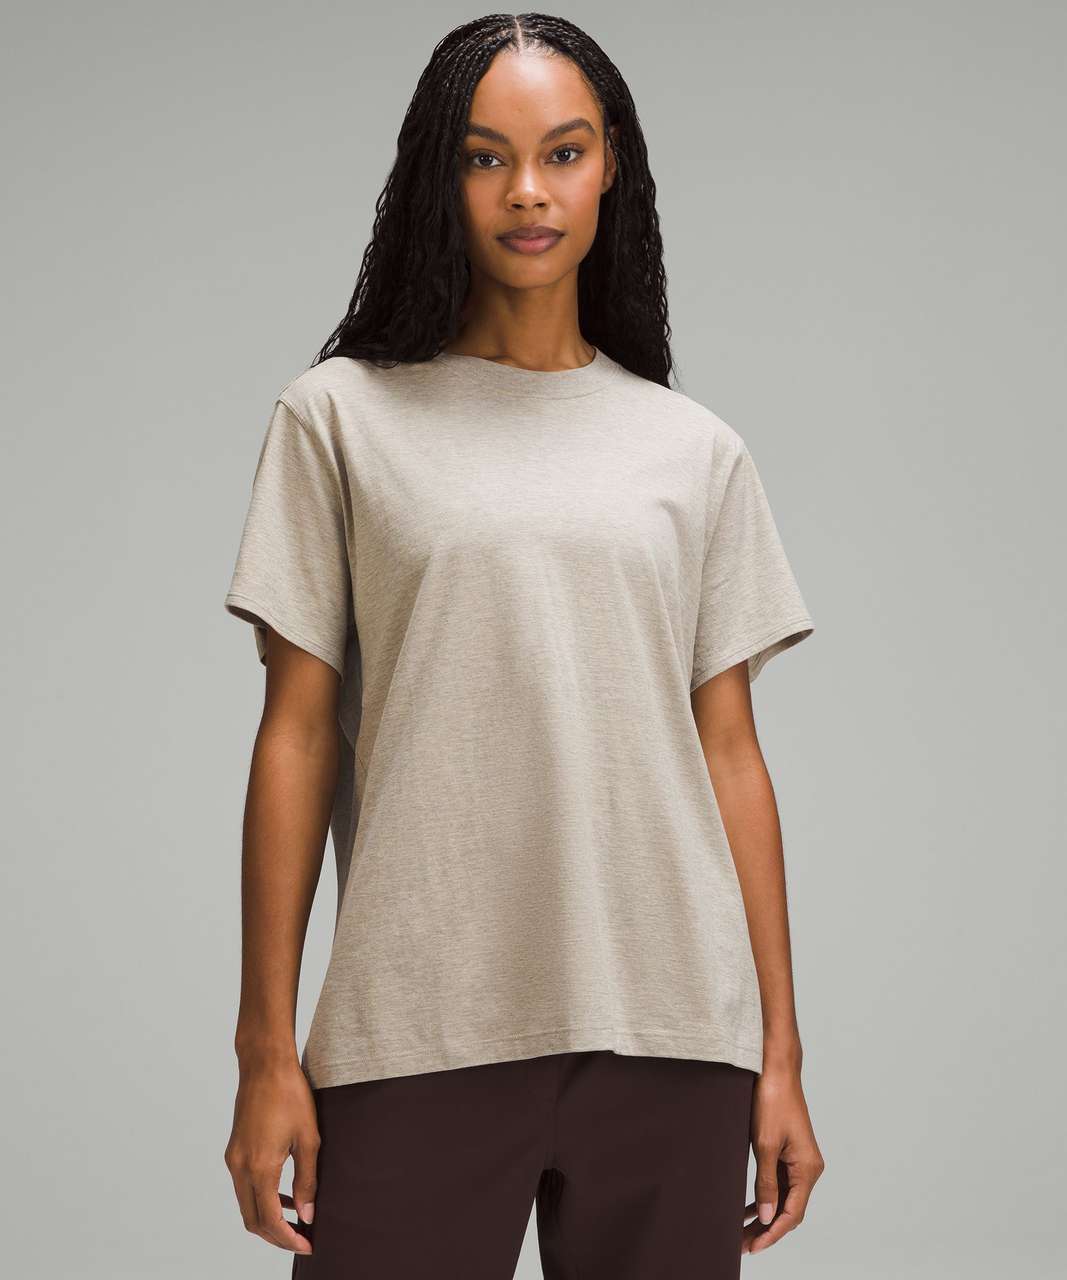 Lululemon All Yours Cotton T-Shirt - Heathered Riverstone